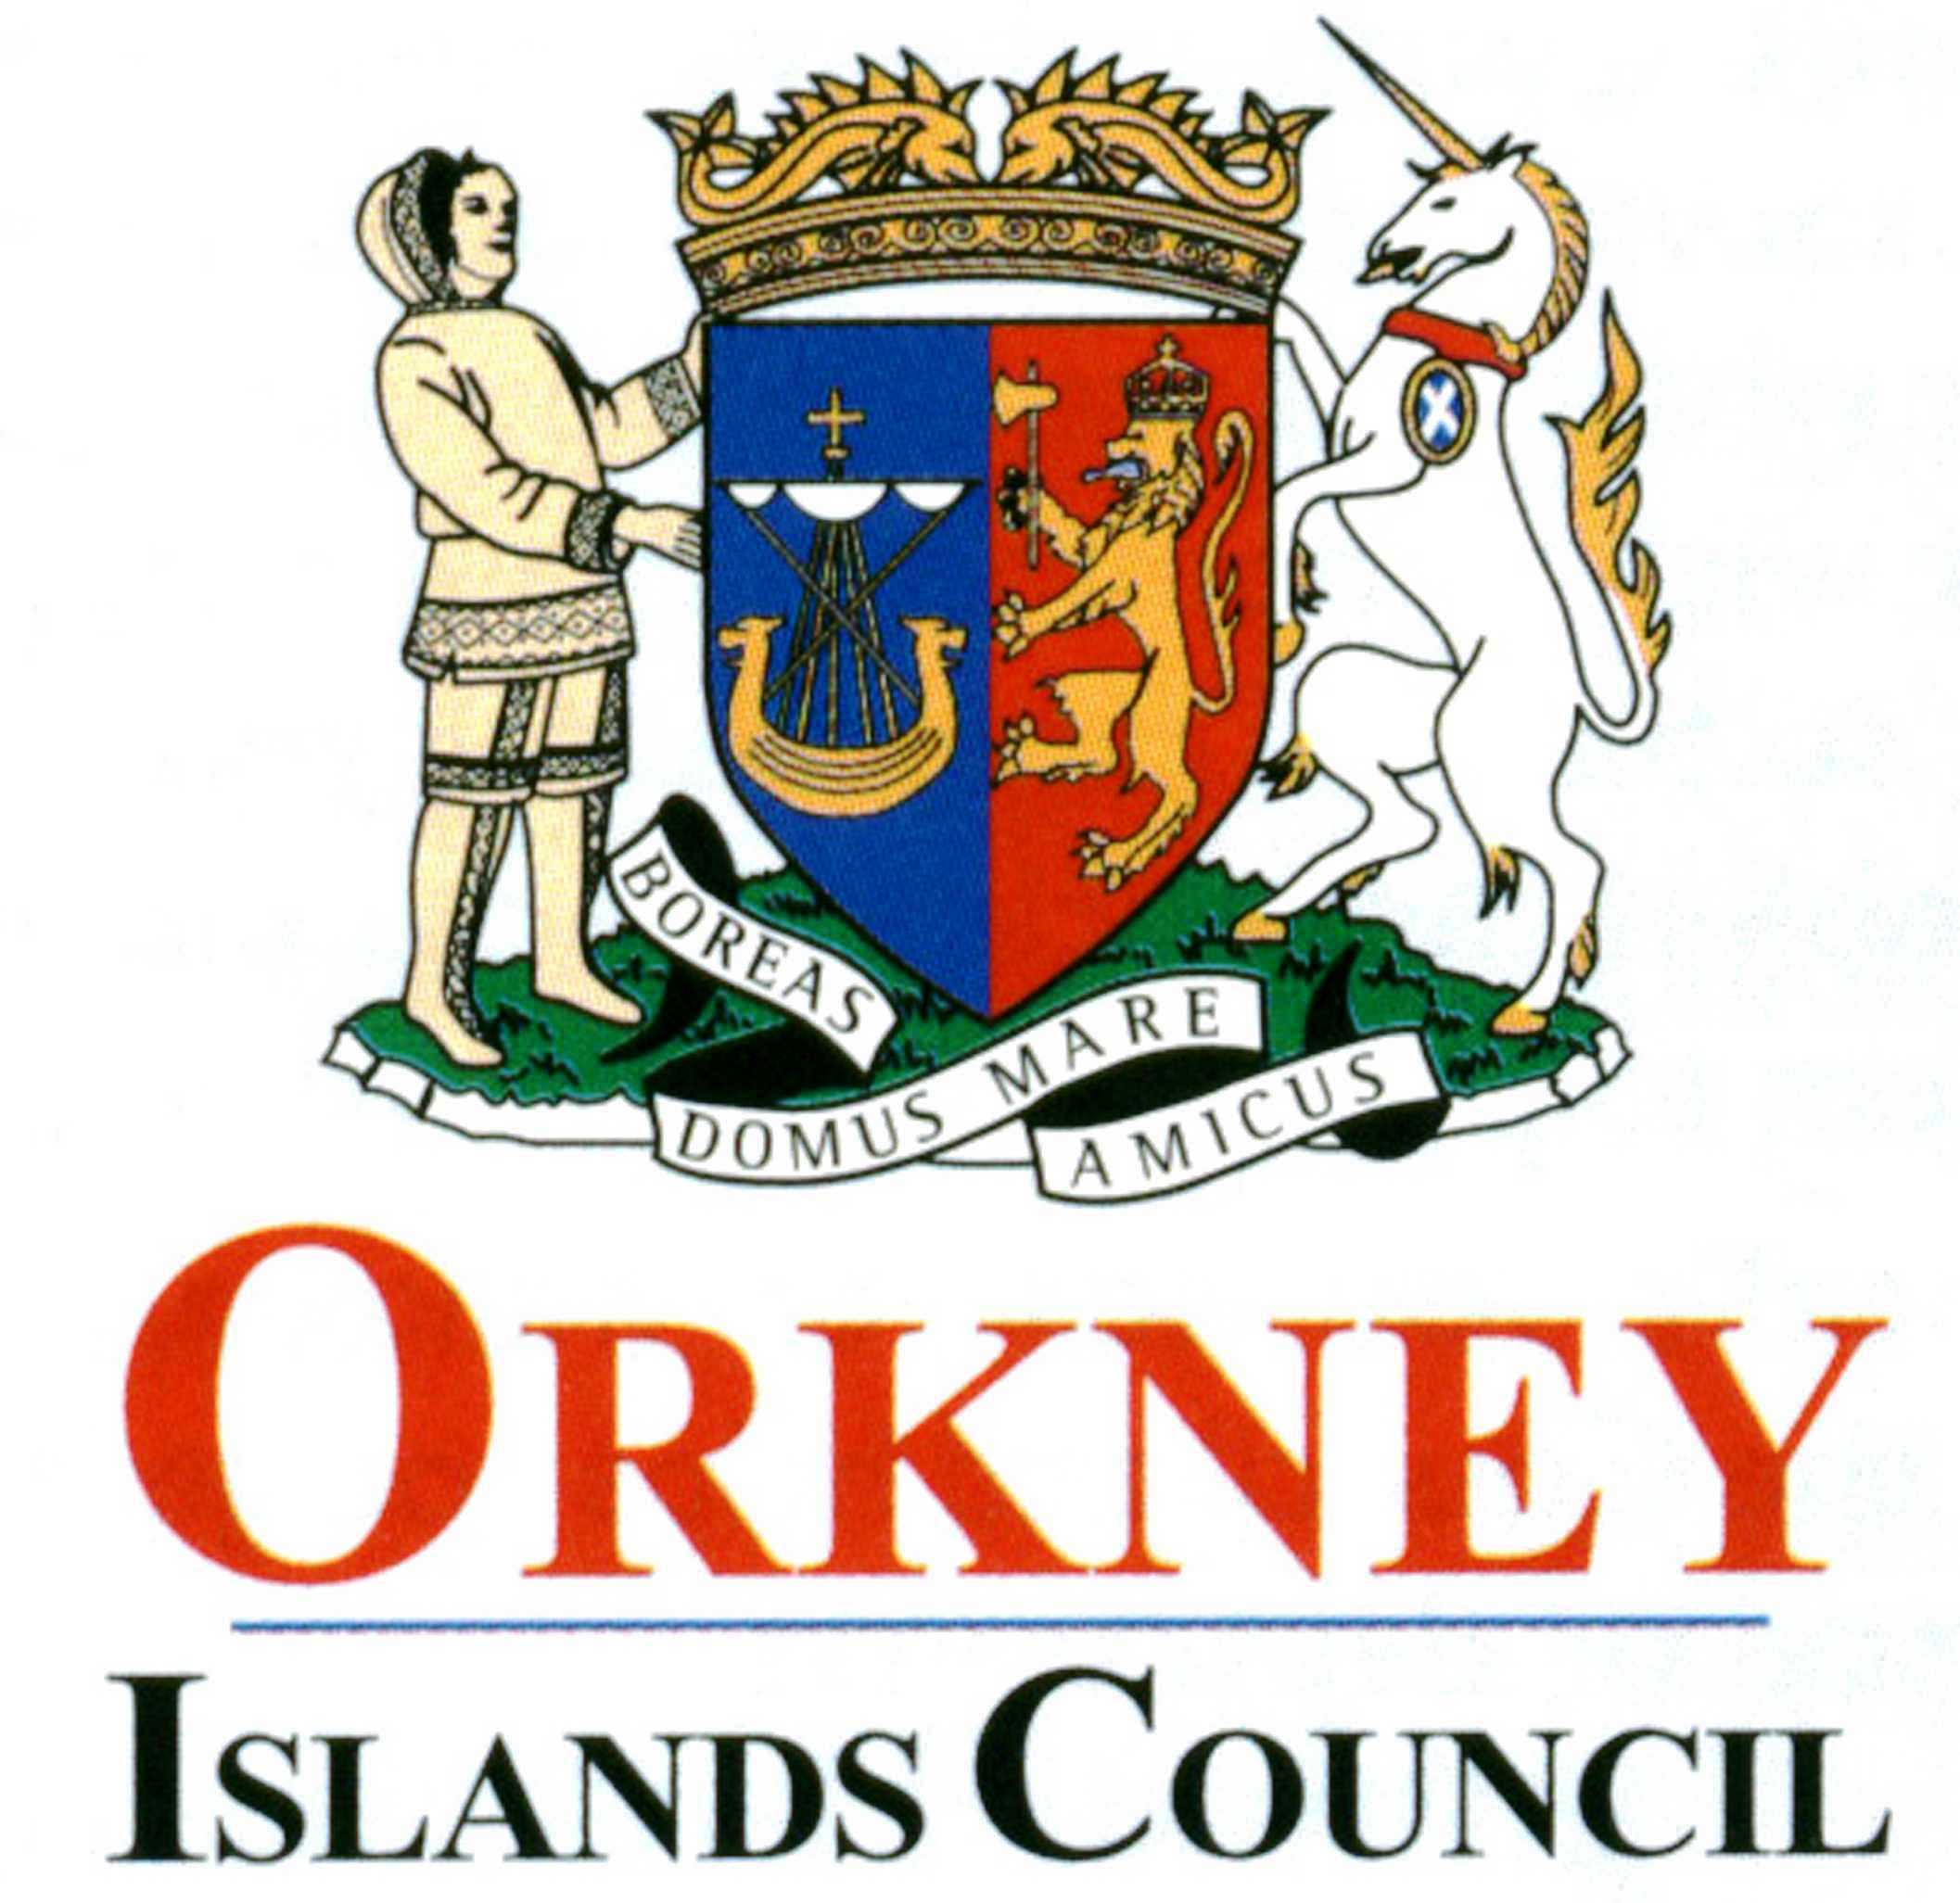 Consultation launched on local Orkney housing strategy